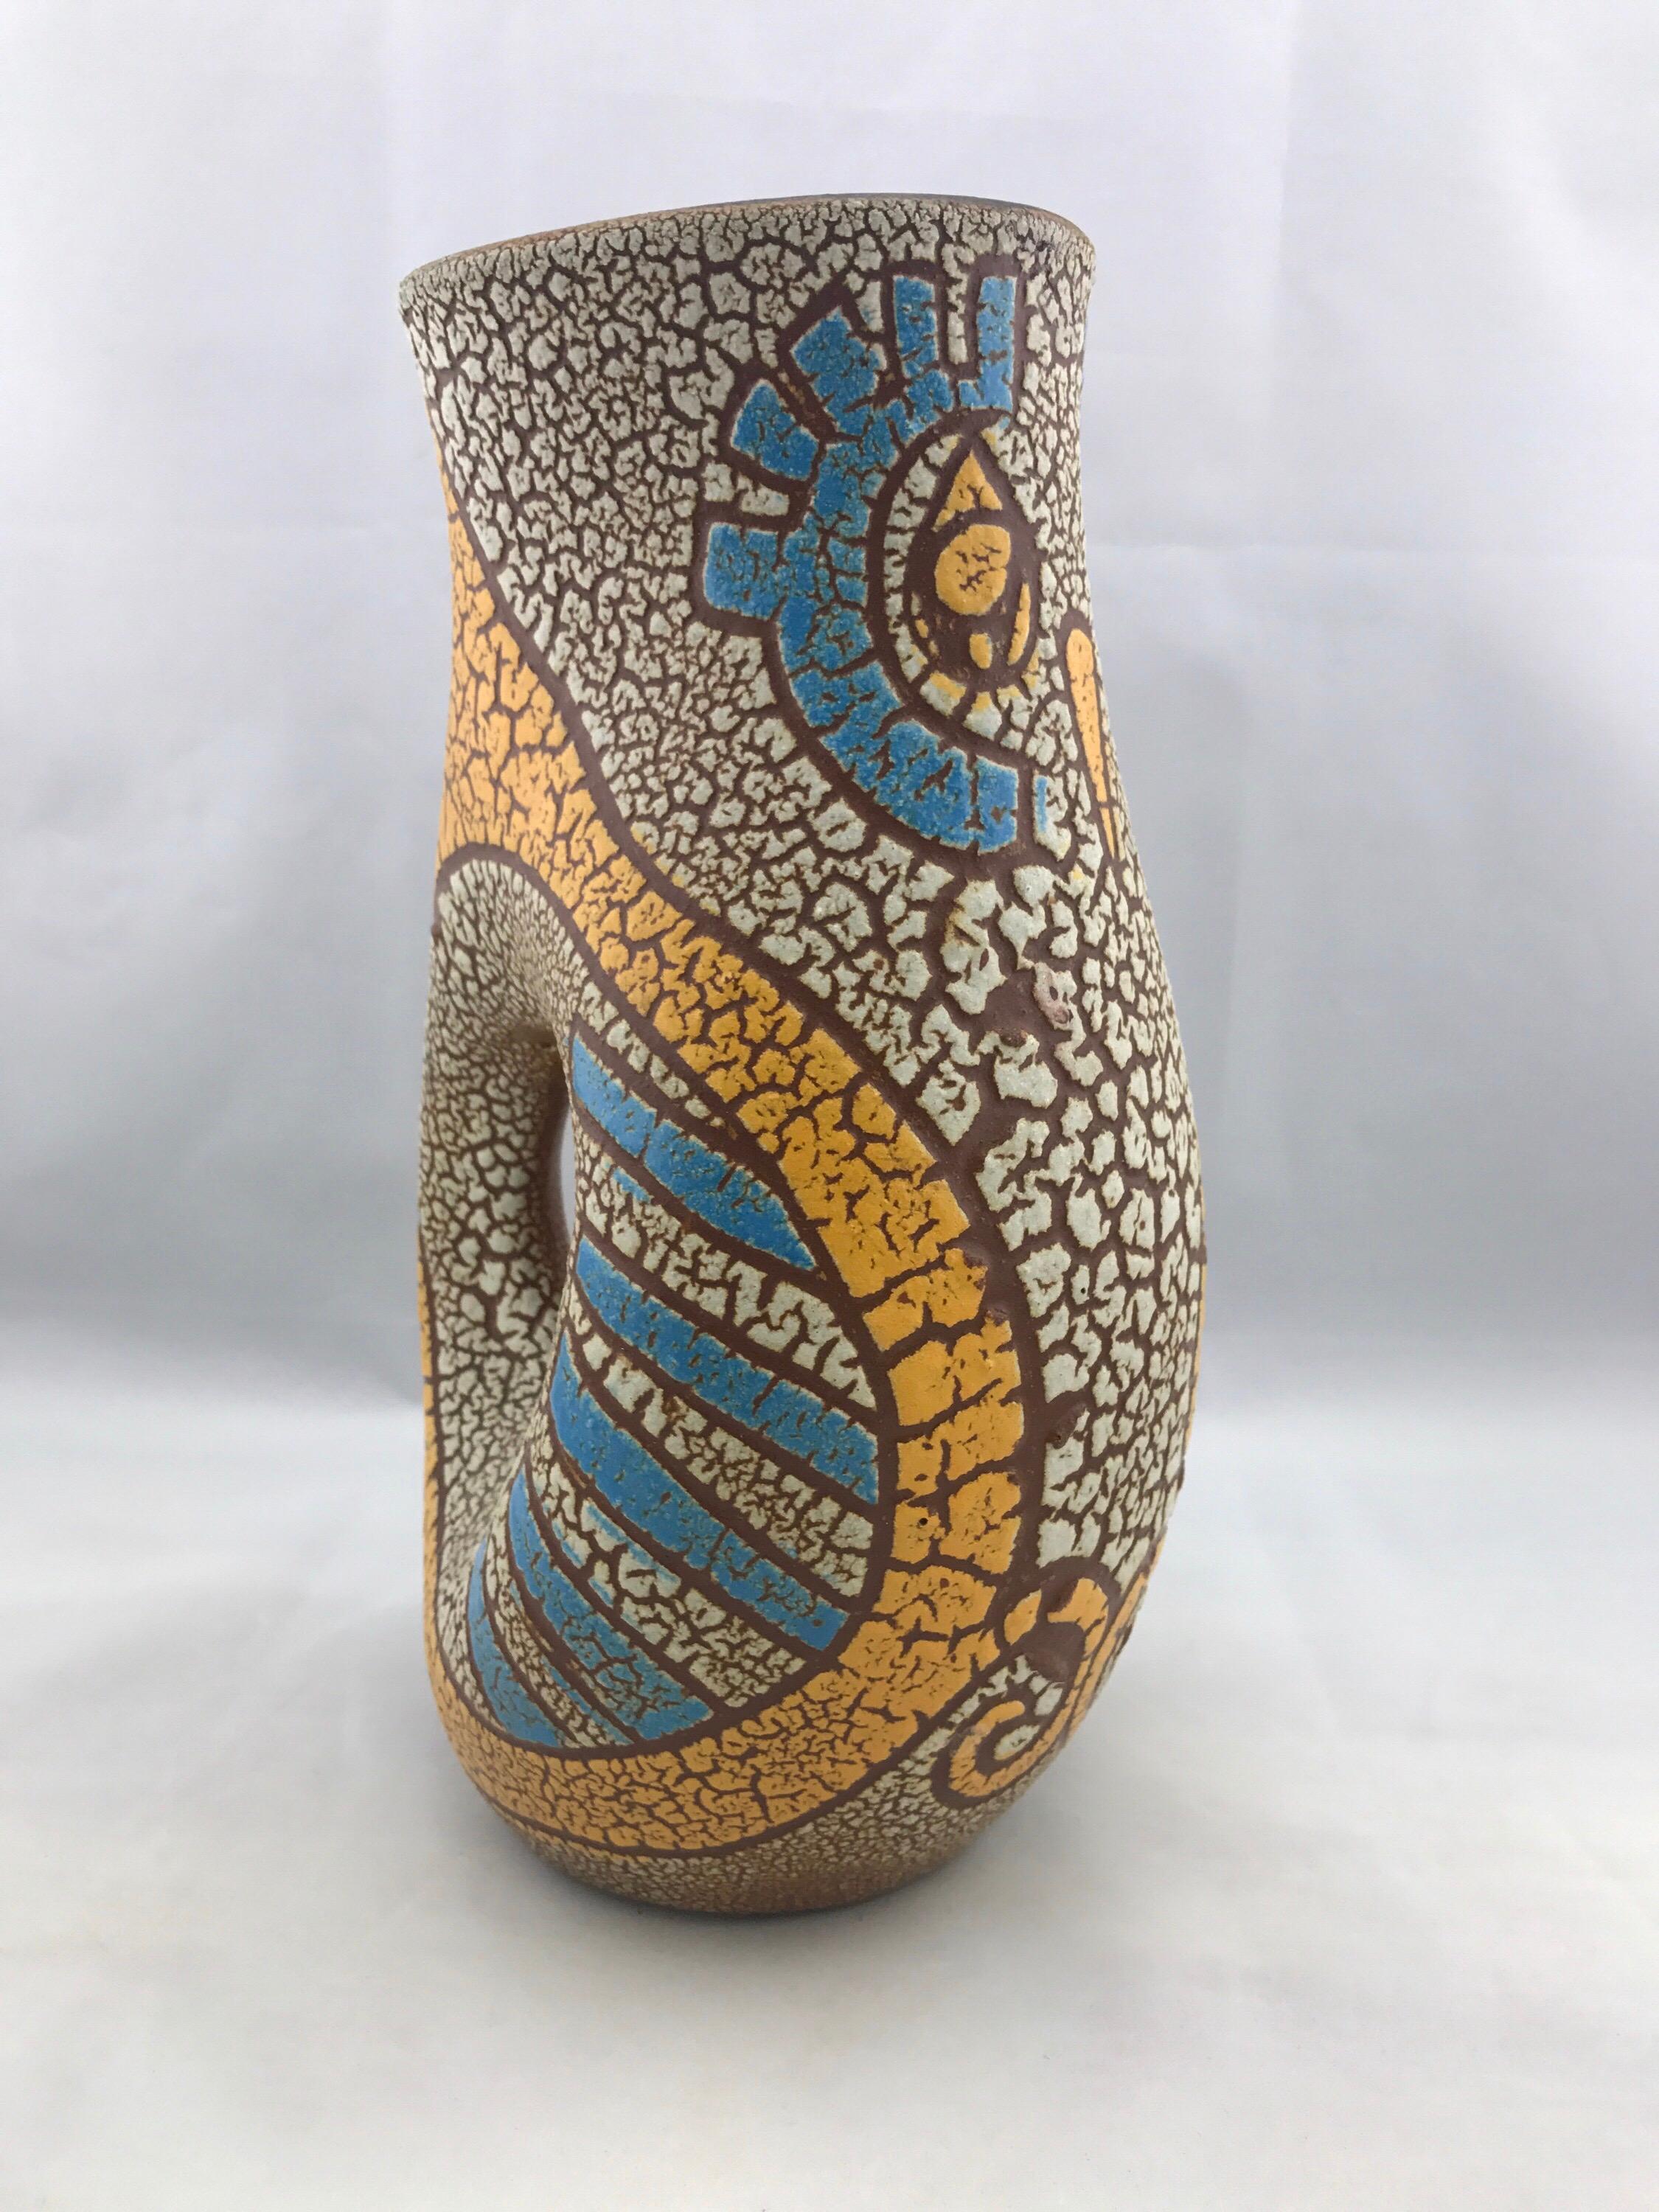 Mid-Century Modern French vase by Accolay, vintage blue and yellow modernist owl.
No know issues that would detract from value or aesthetics. Clean and ready for use.